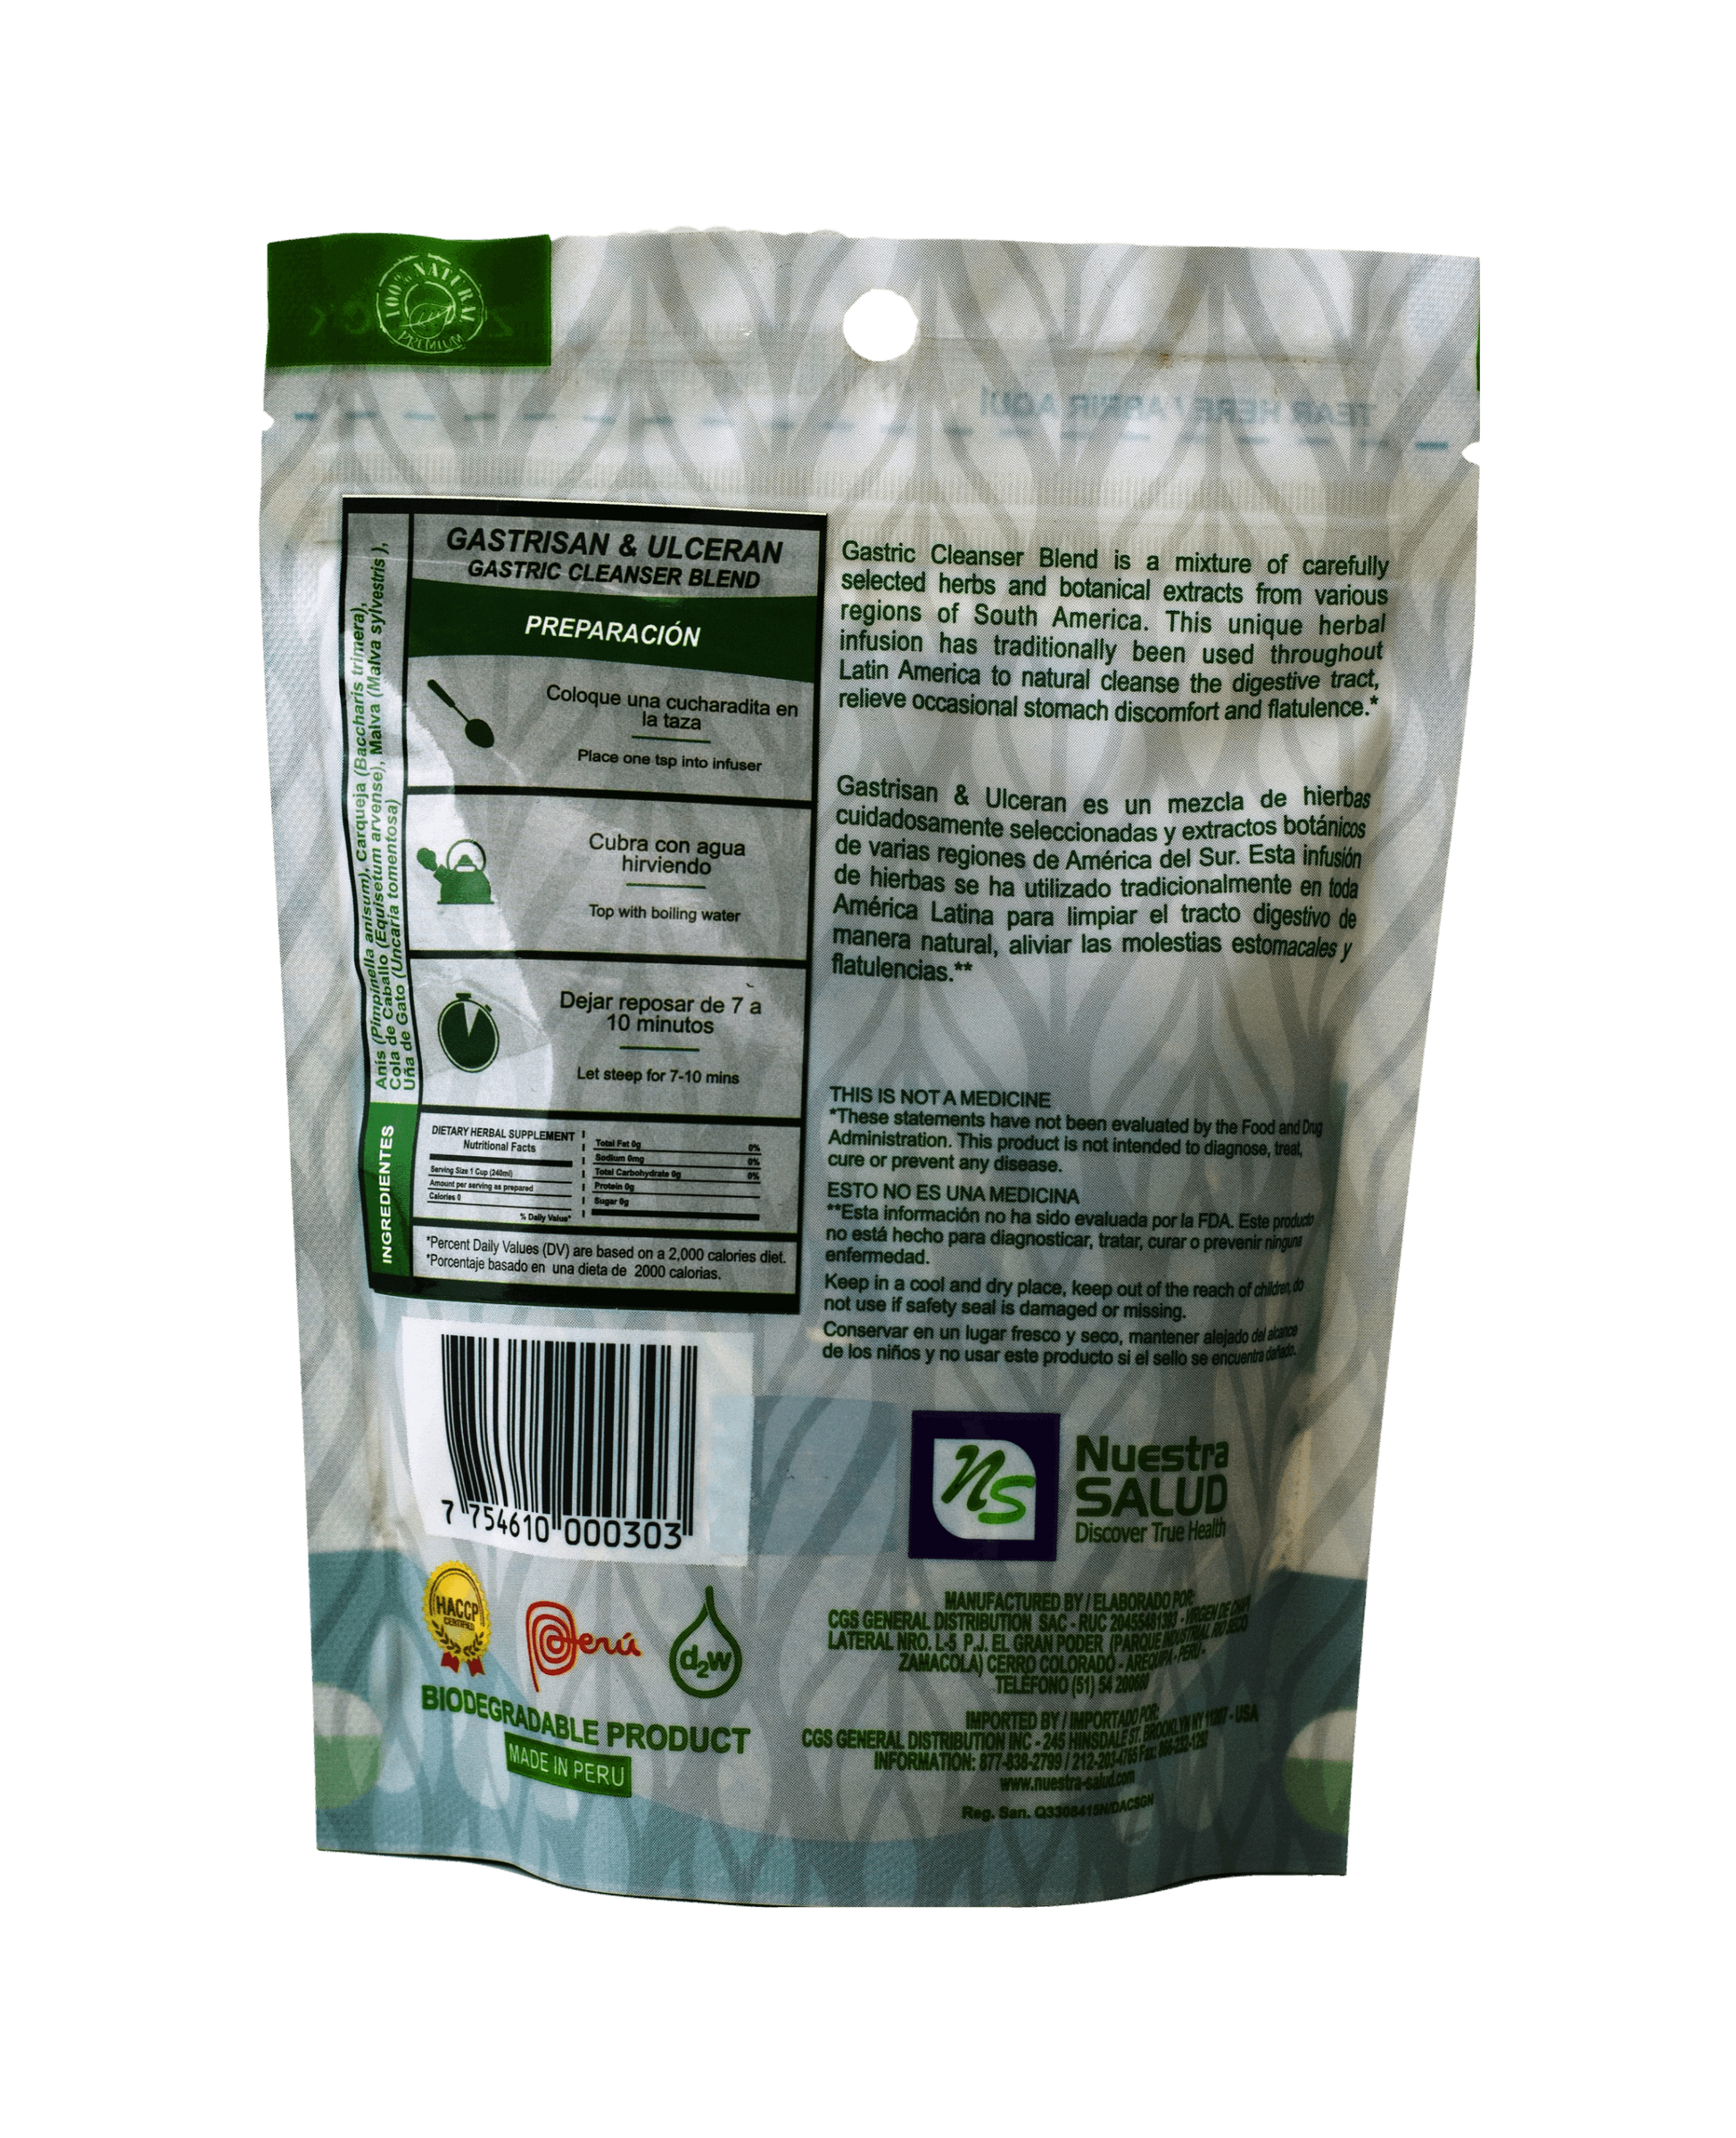  Gastrisan Ulceran Gastric Cleanser Loose Blend Herbal Infusion Tea Value Pack (90g) by Nuestra Salud sold by NS Herbs Co.